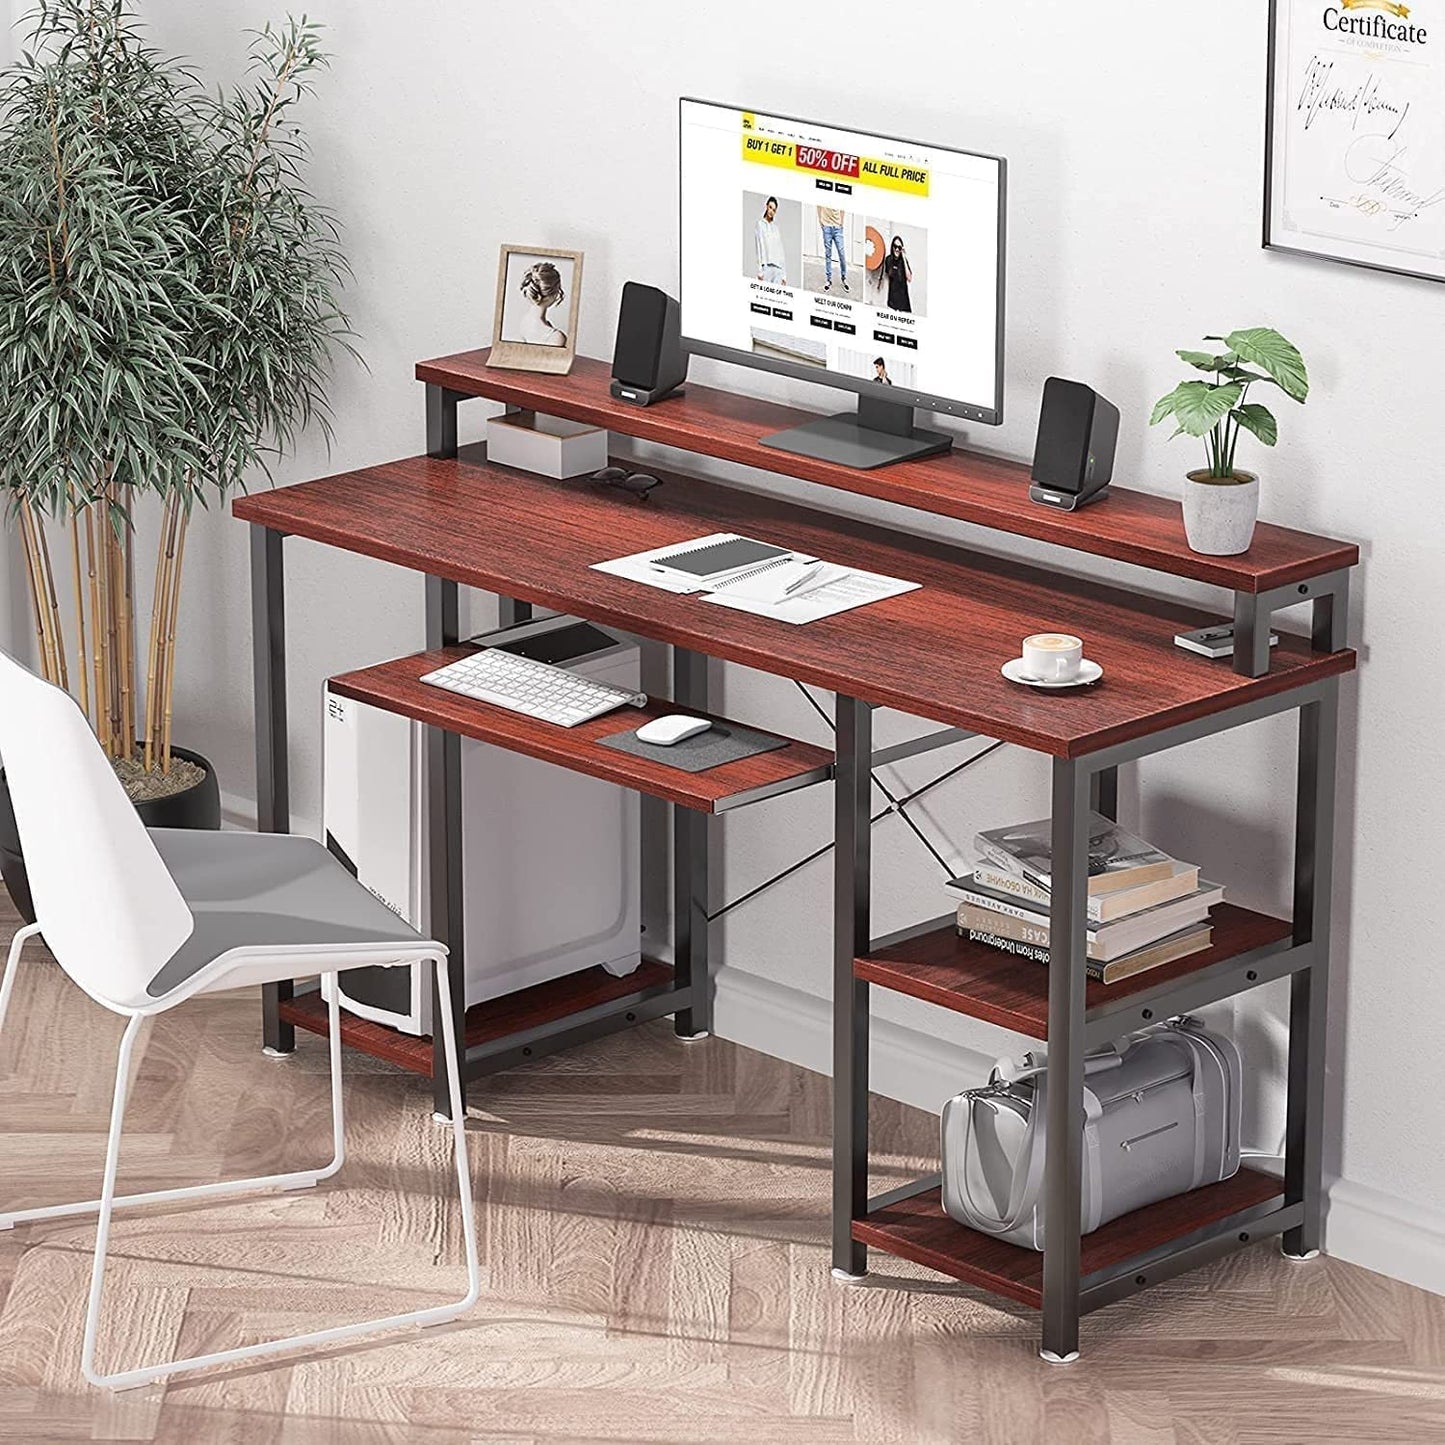 47" Studying Writing Table for Home Office (Cherry)